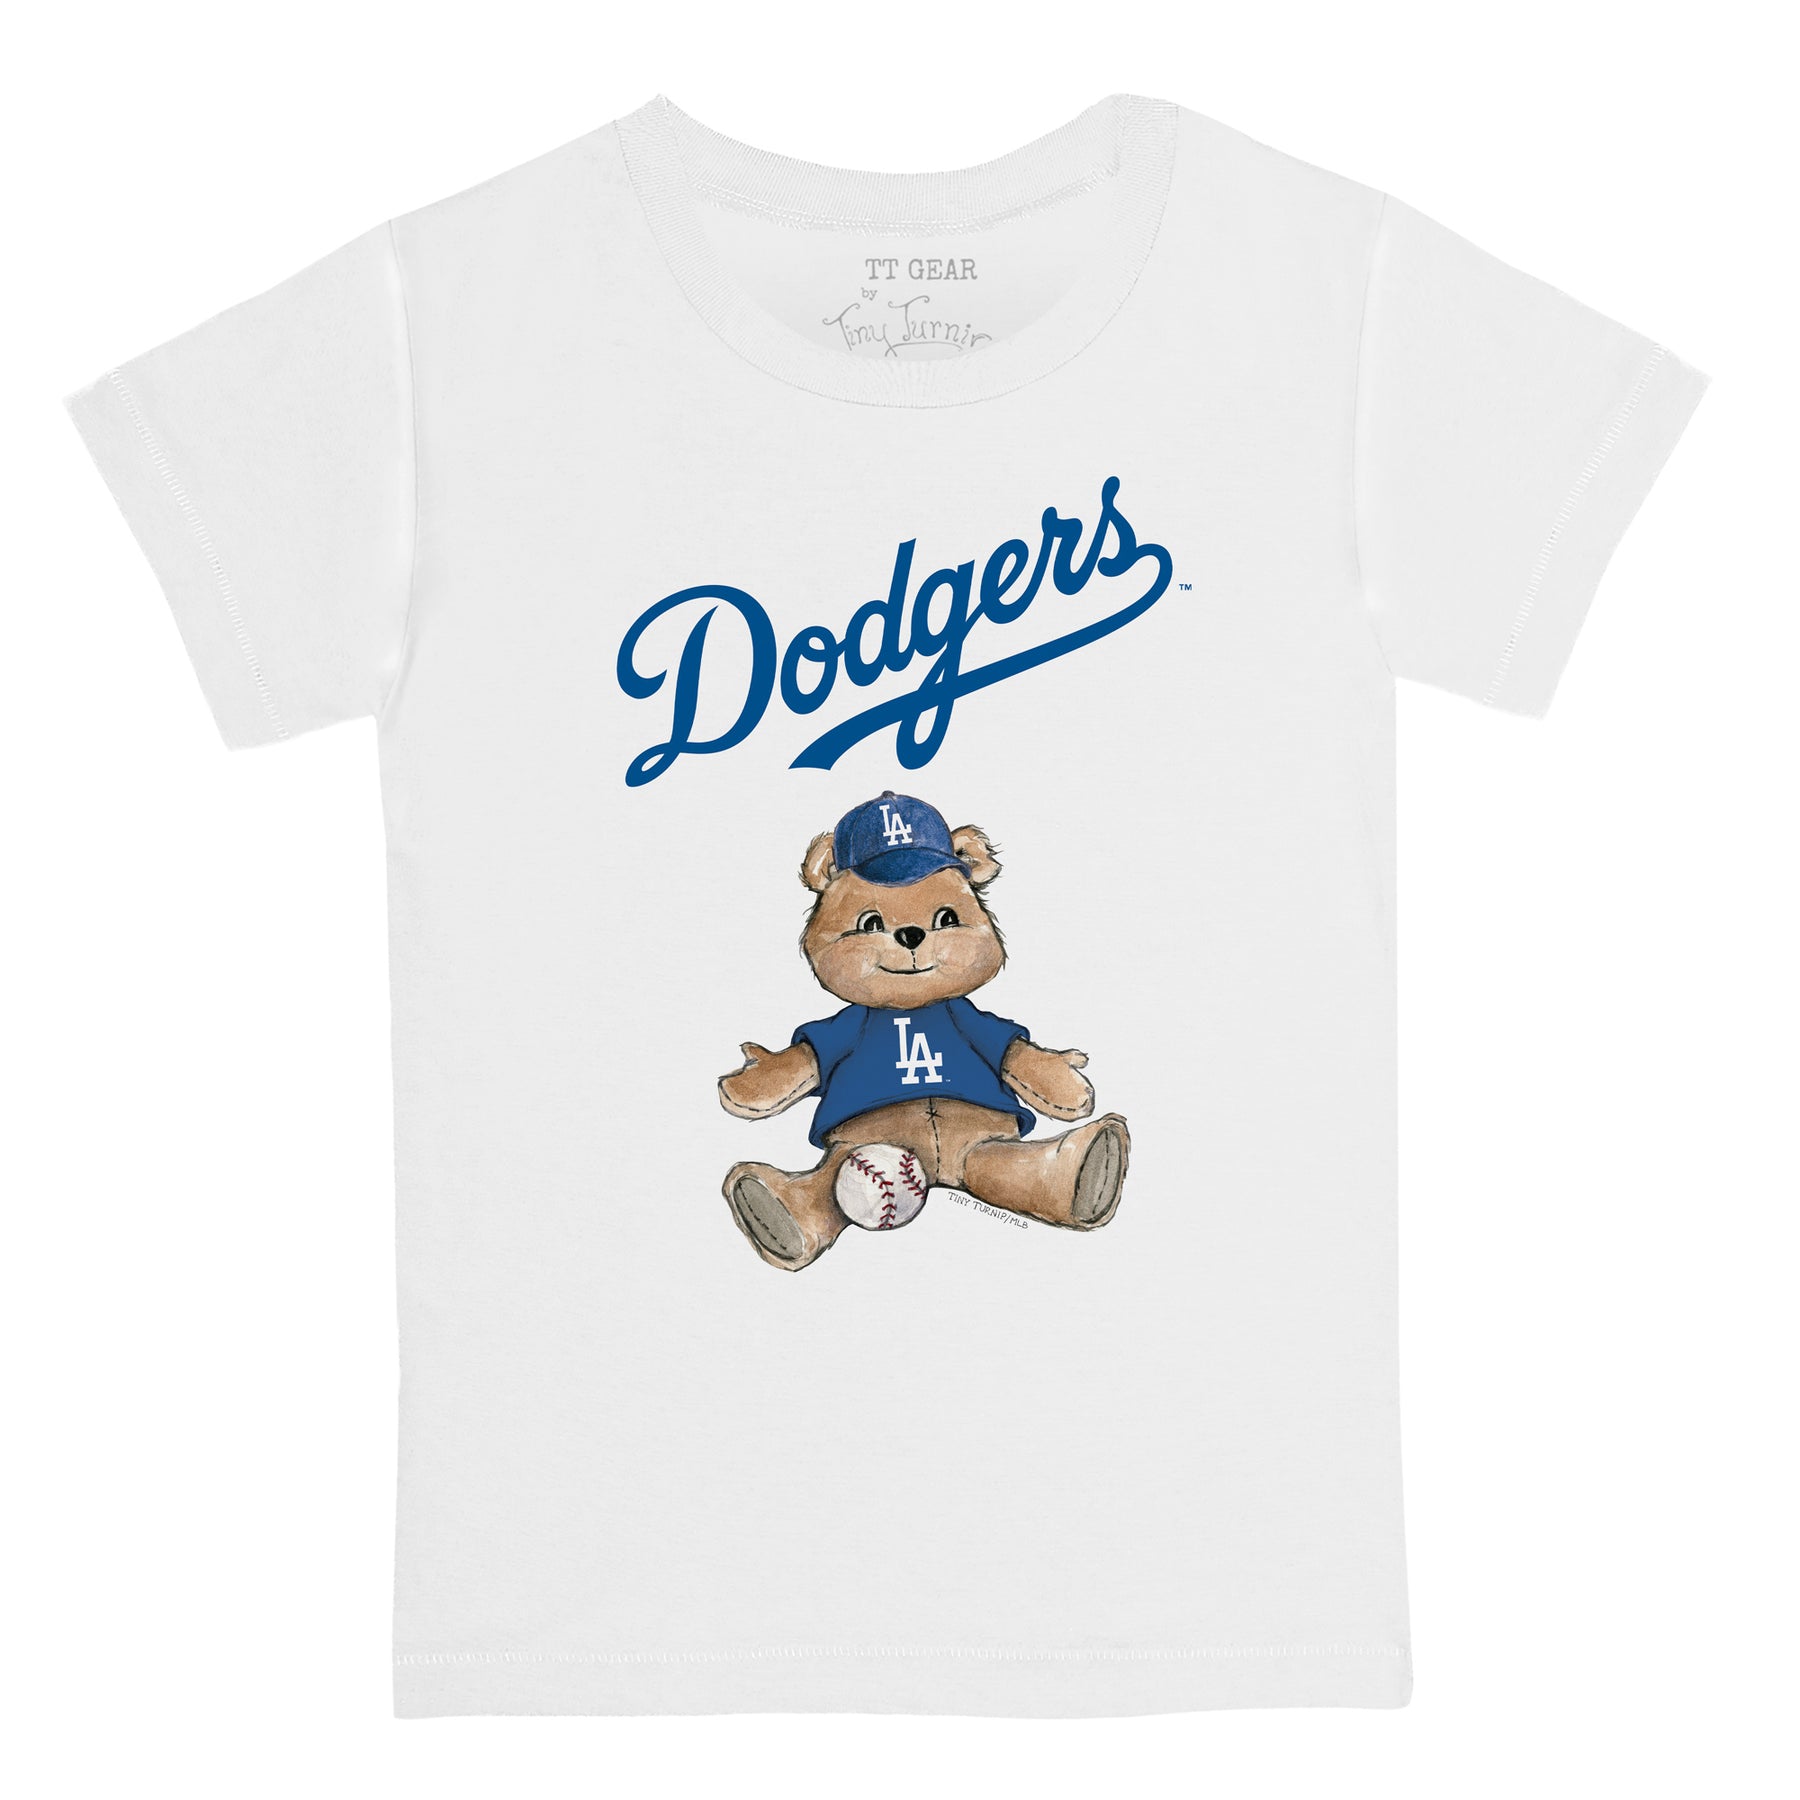 Tiny Turnip Los Angeles Dodgers Spring Training 2023 Tee Shirt Youth Small (6-8) / White